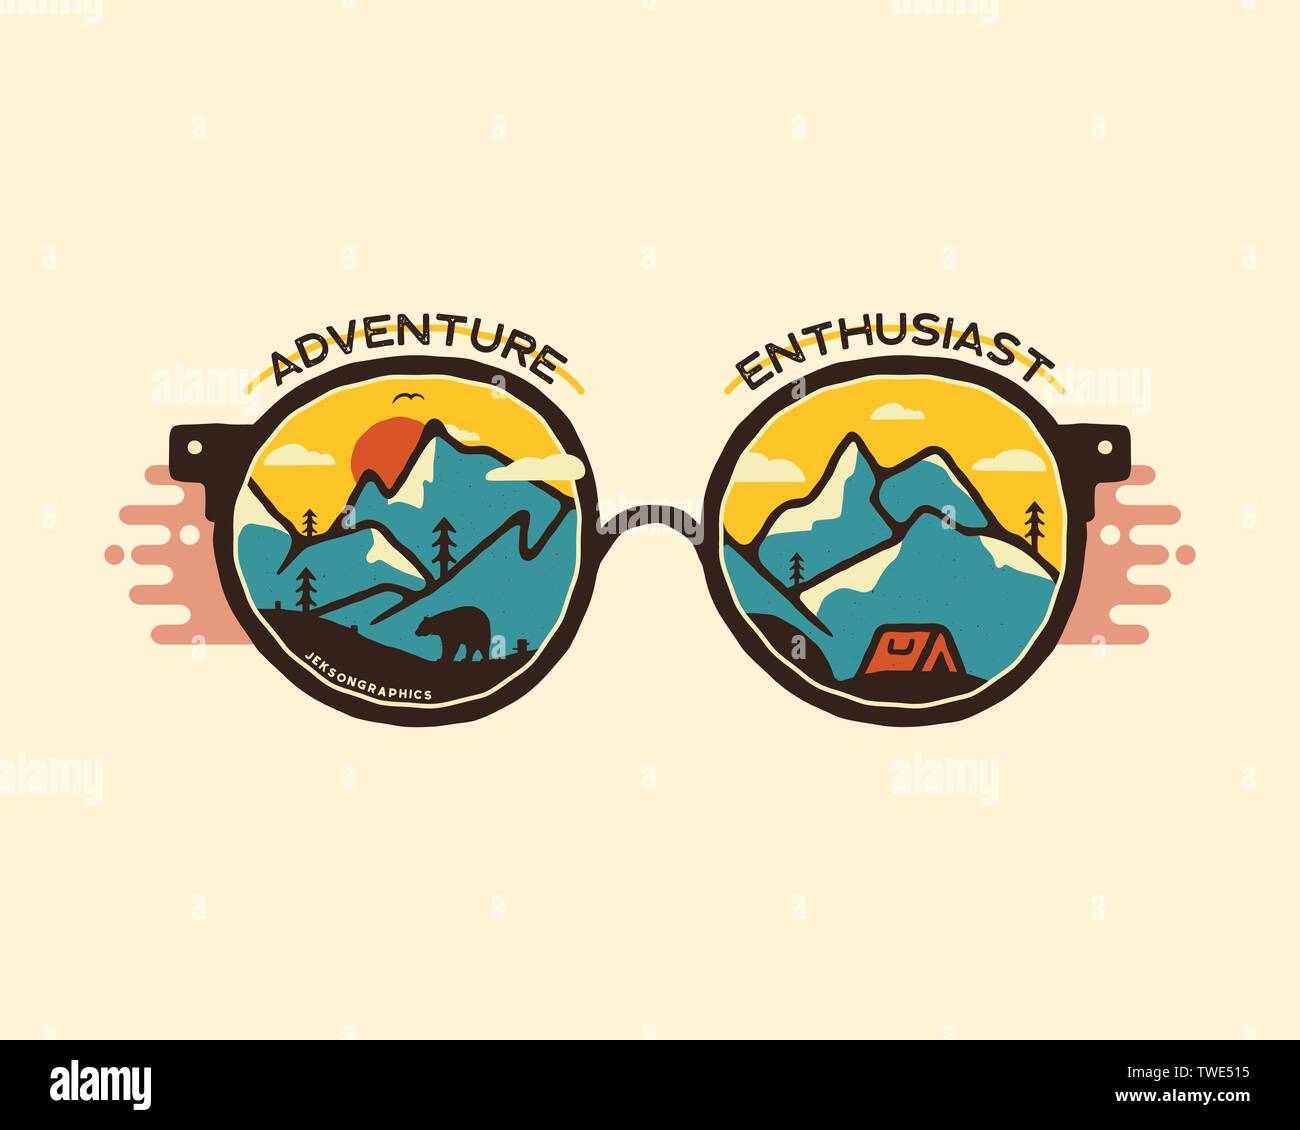 Camping badge illustration design. Outdoor logo with quote - Adventure enthusiast, for t shirt. Included retro mountains, bear and tent. Unusual Stock Vector